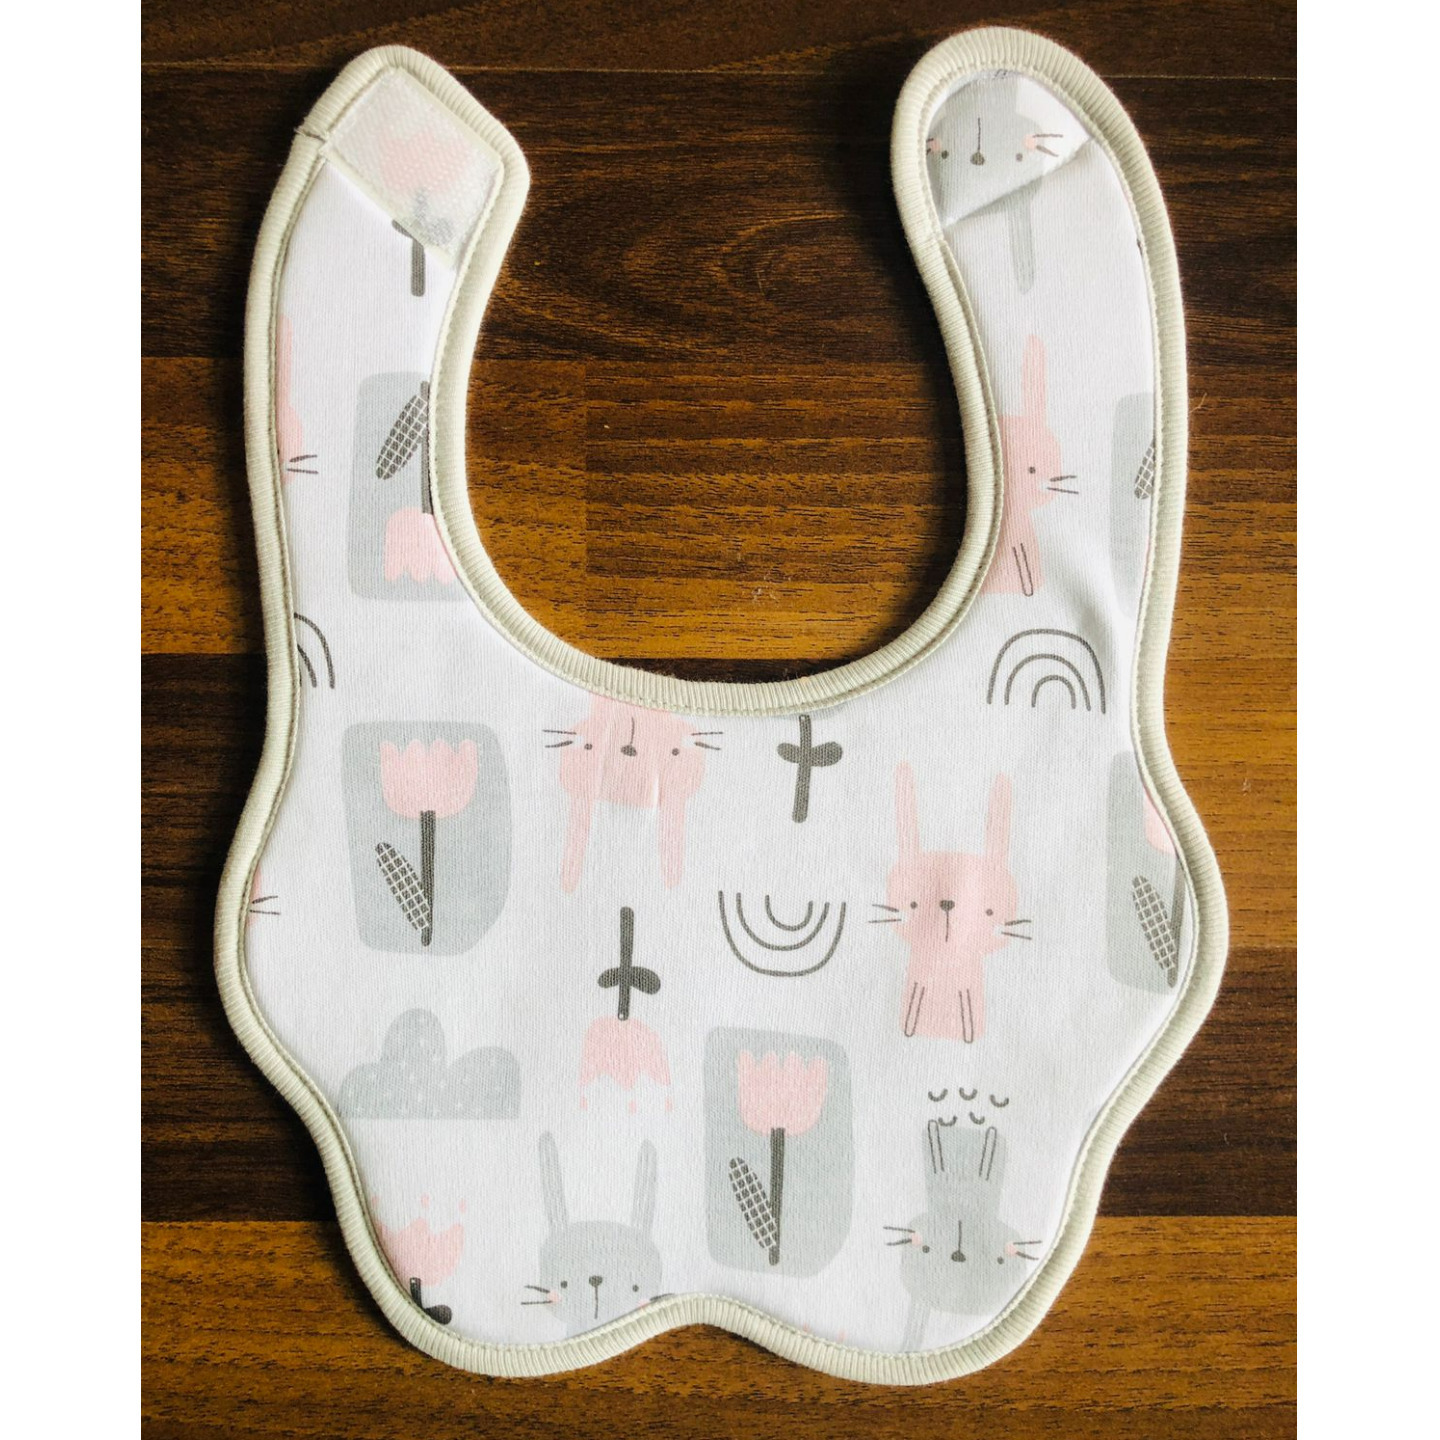 Cradle Togs Newborn Infant Baby Bib Rs 140 Only 